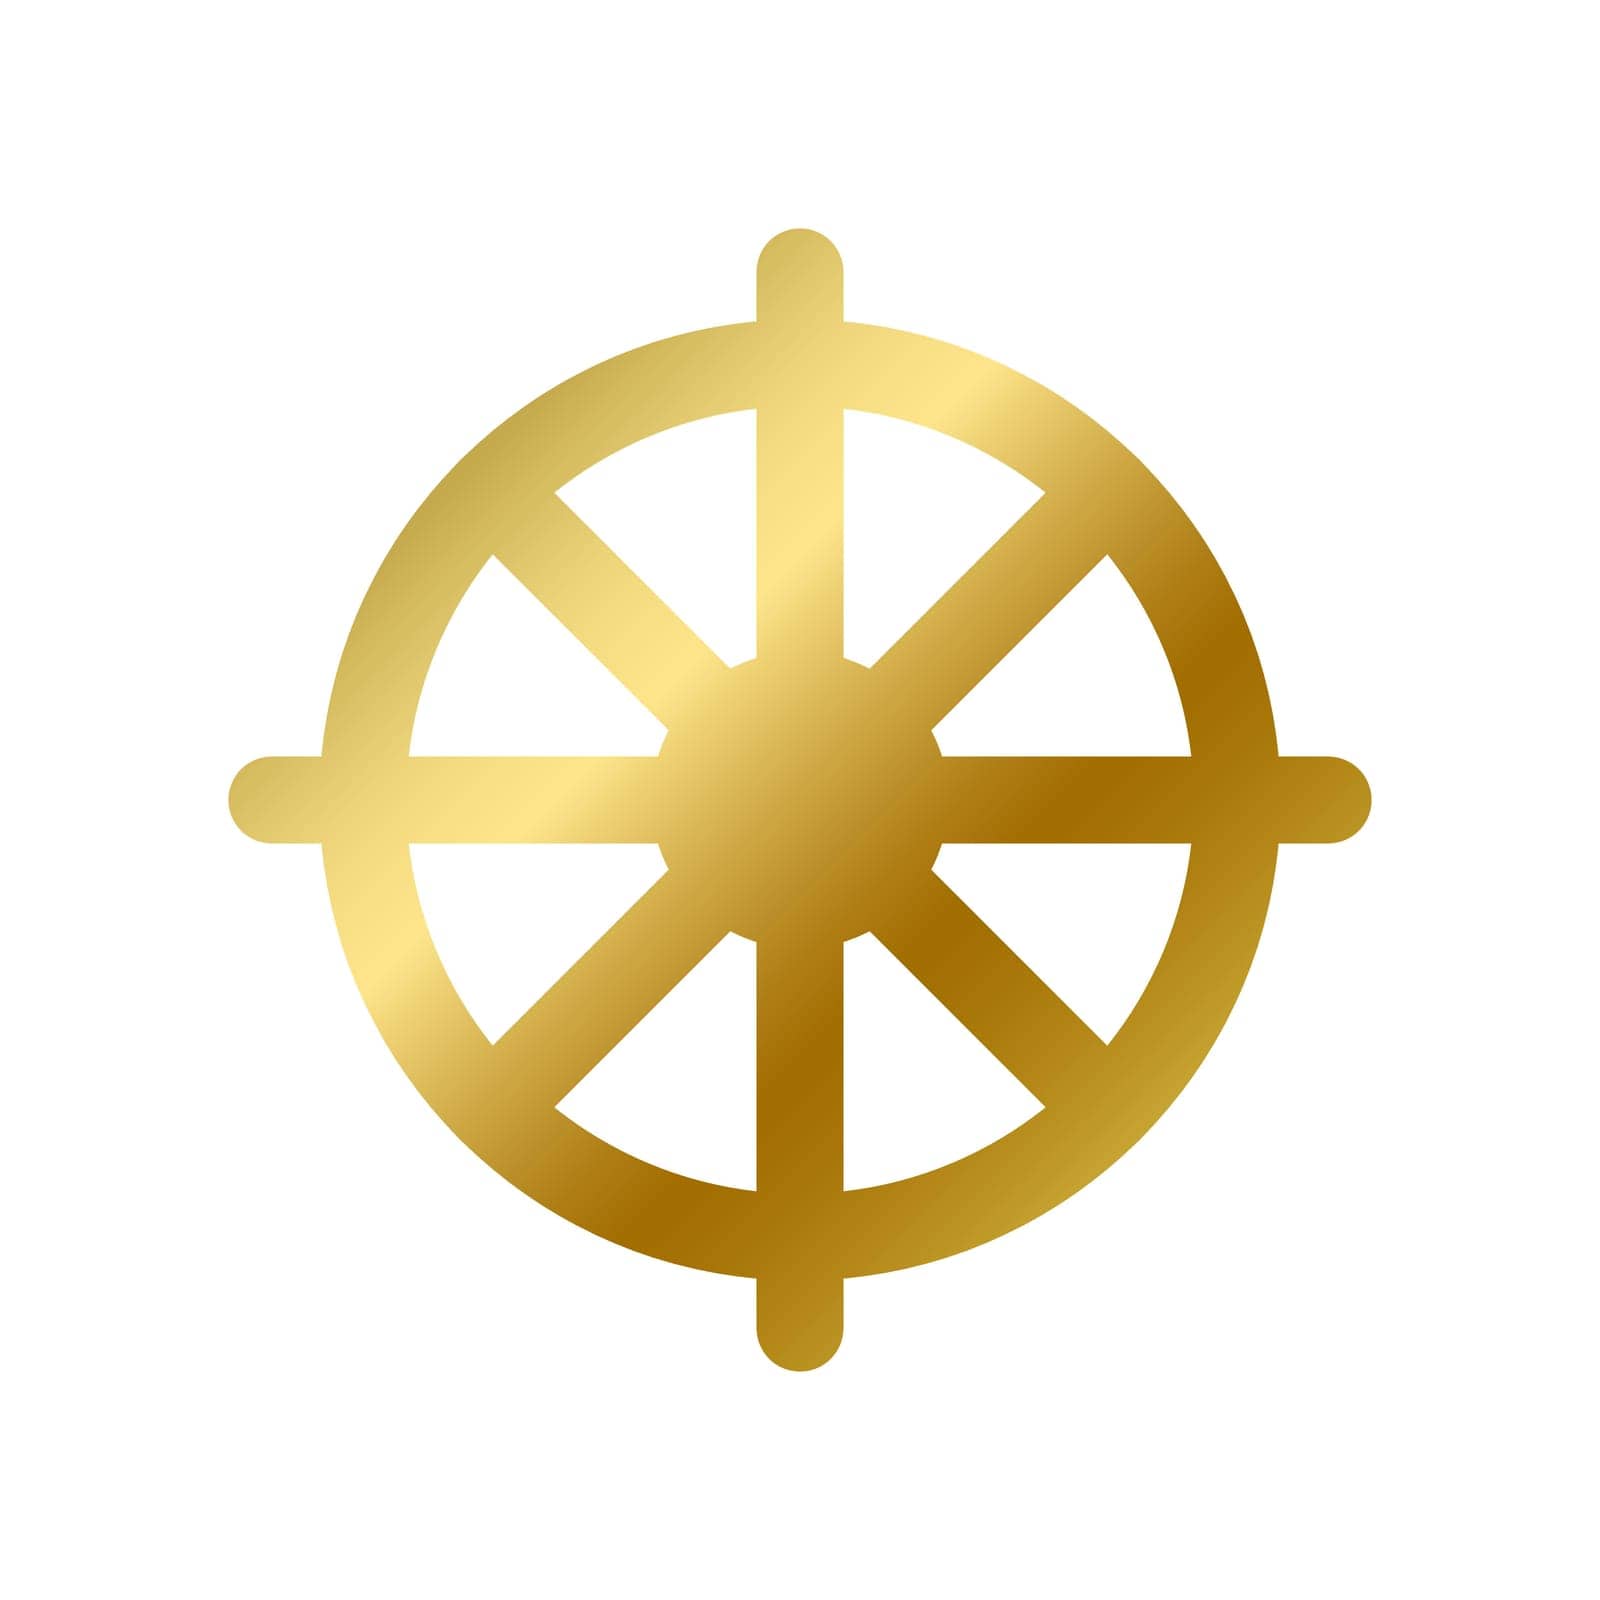 Dharma chakra symbol isolated. Buddhism religious golden sign outline on white background vector design illustration. Shiny gold wheel. Buddha, religion and belief concept